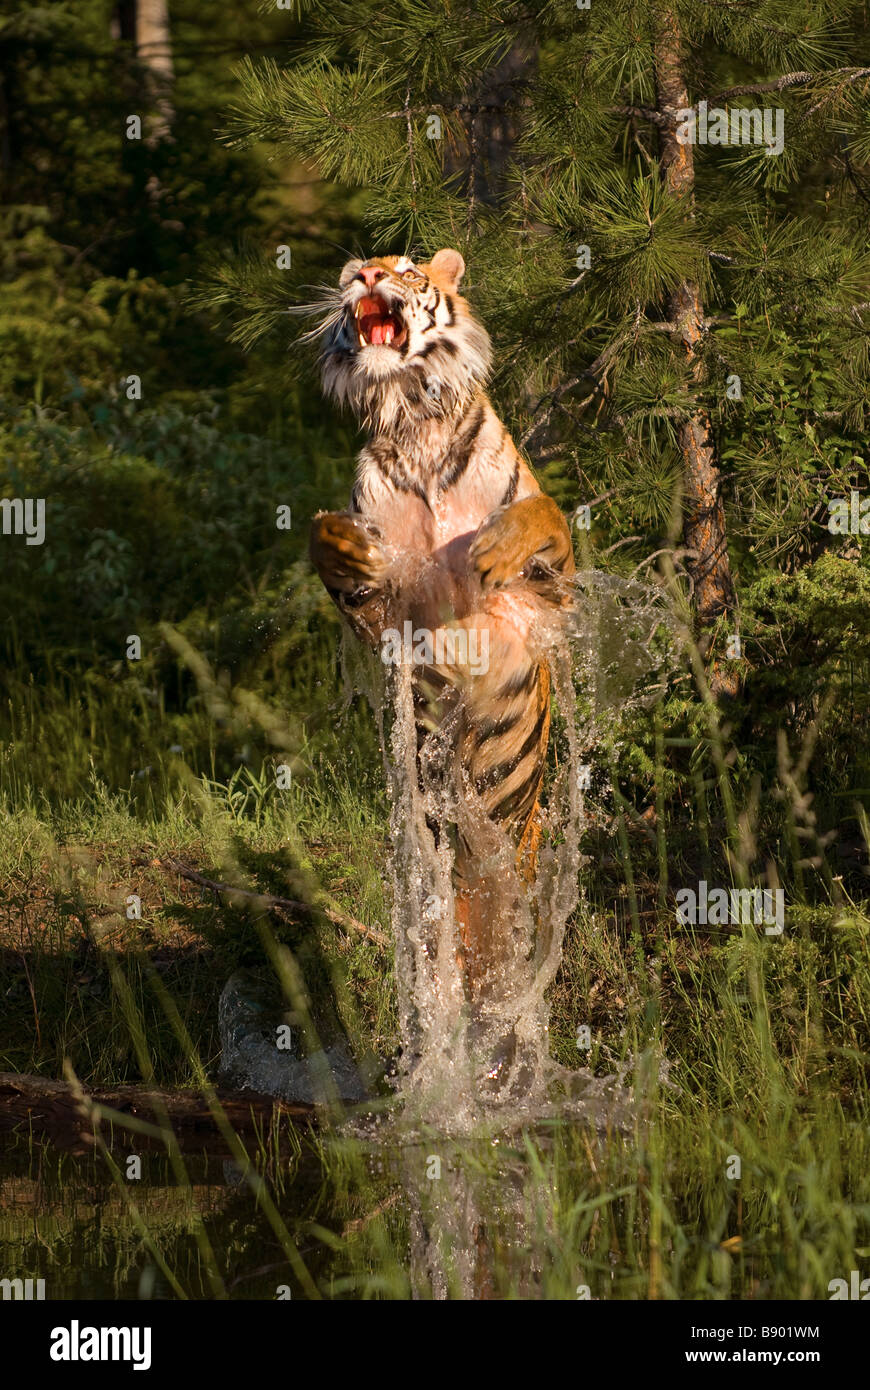 Siberian tiger leaping out of the water of a shallow pond Stock Photo